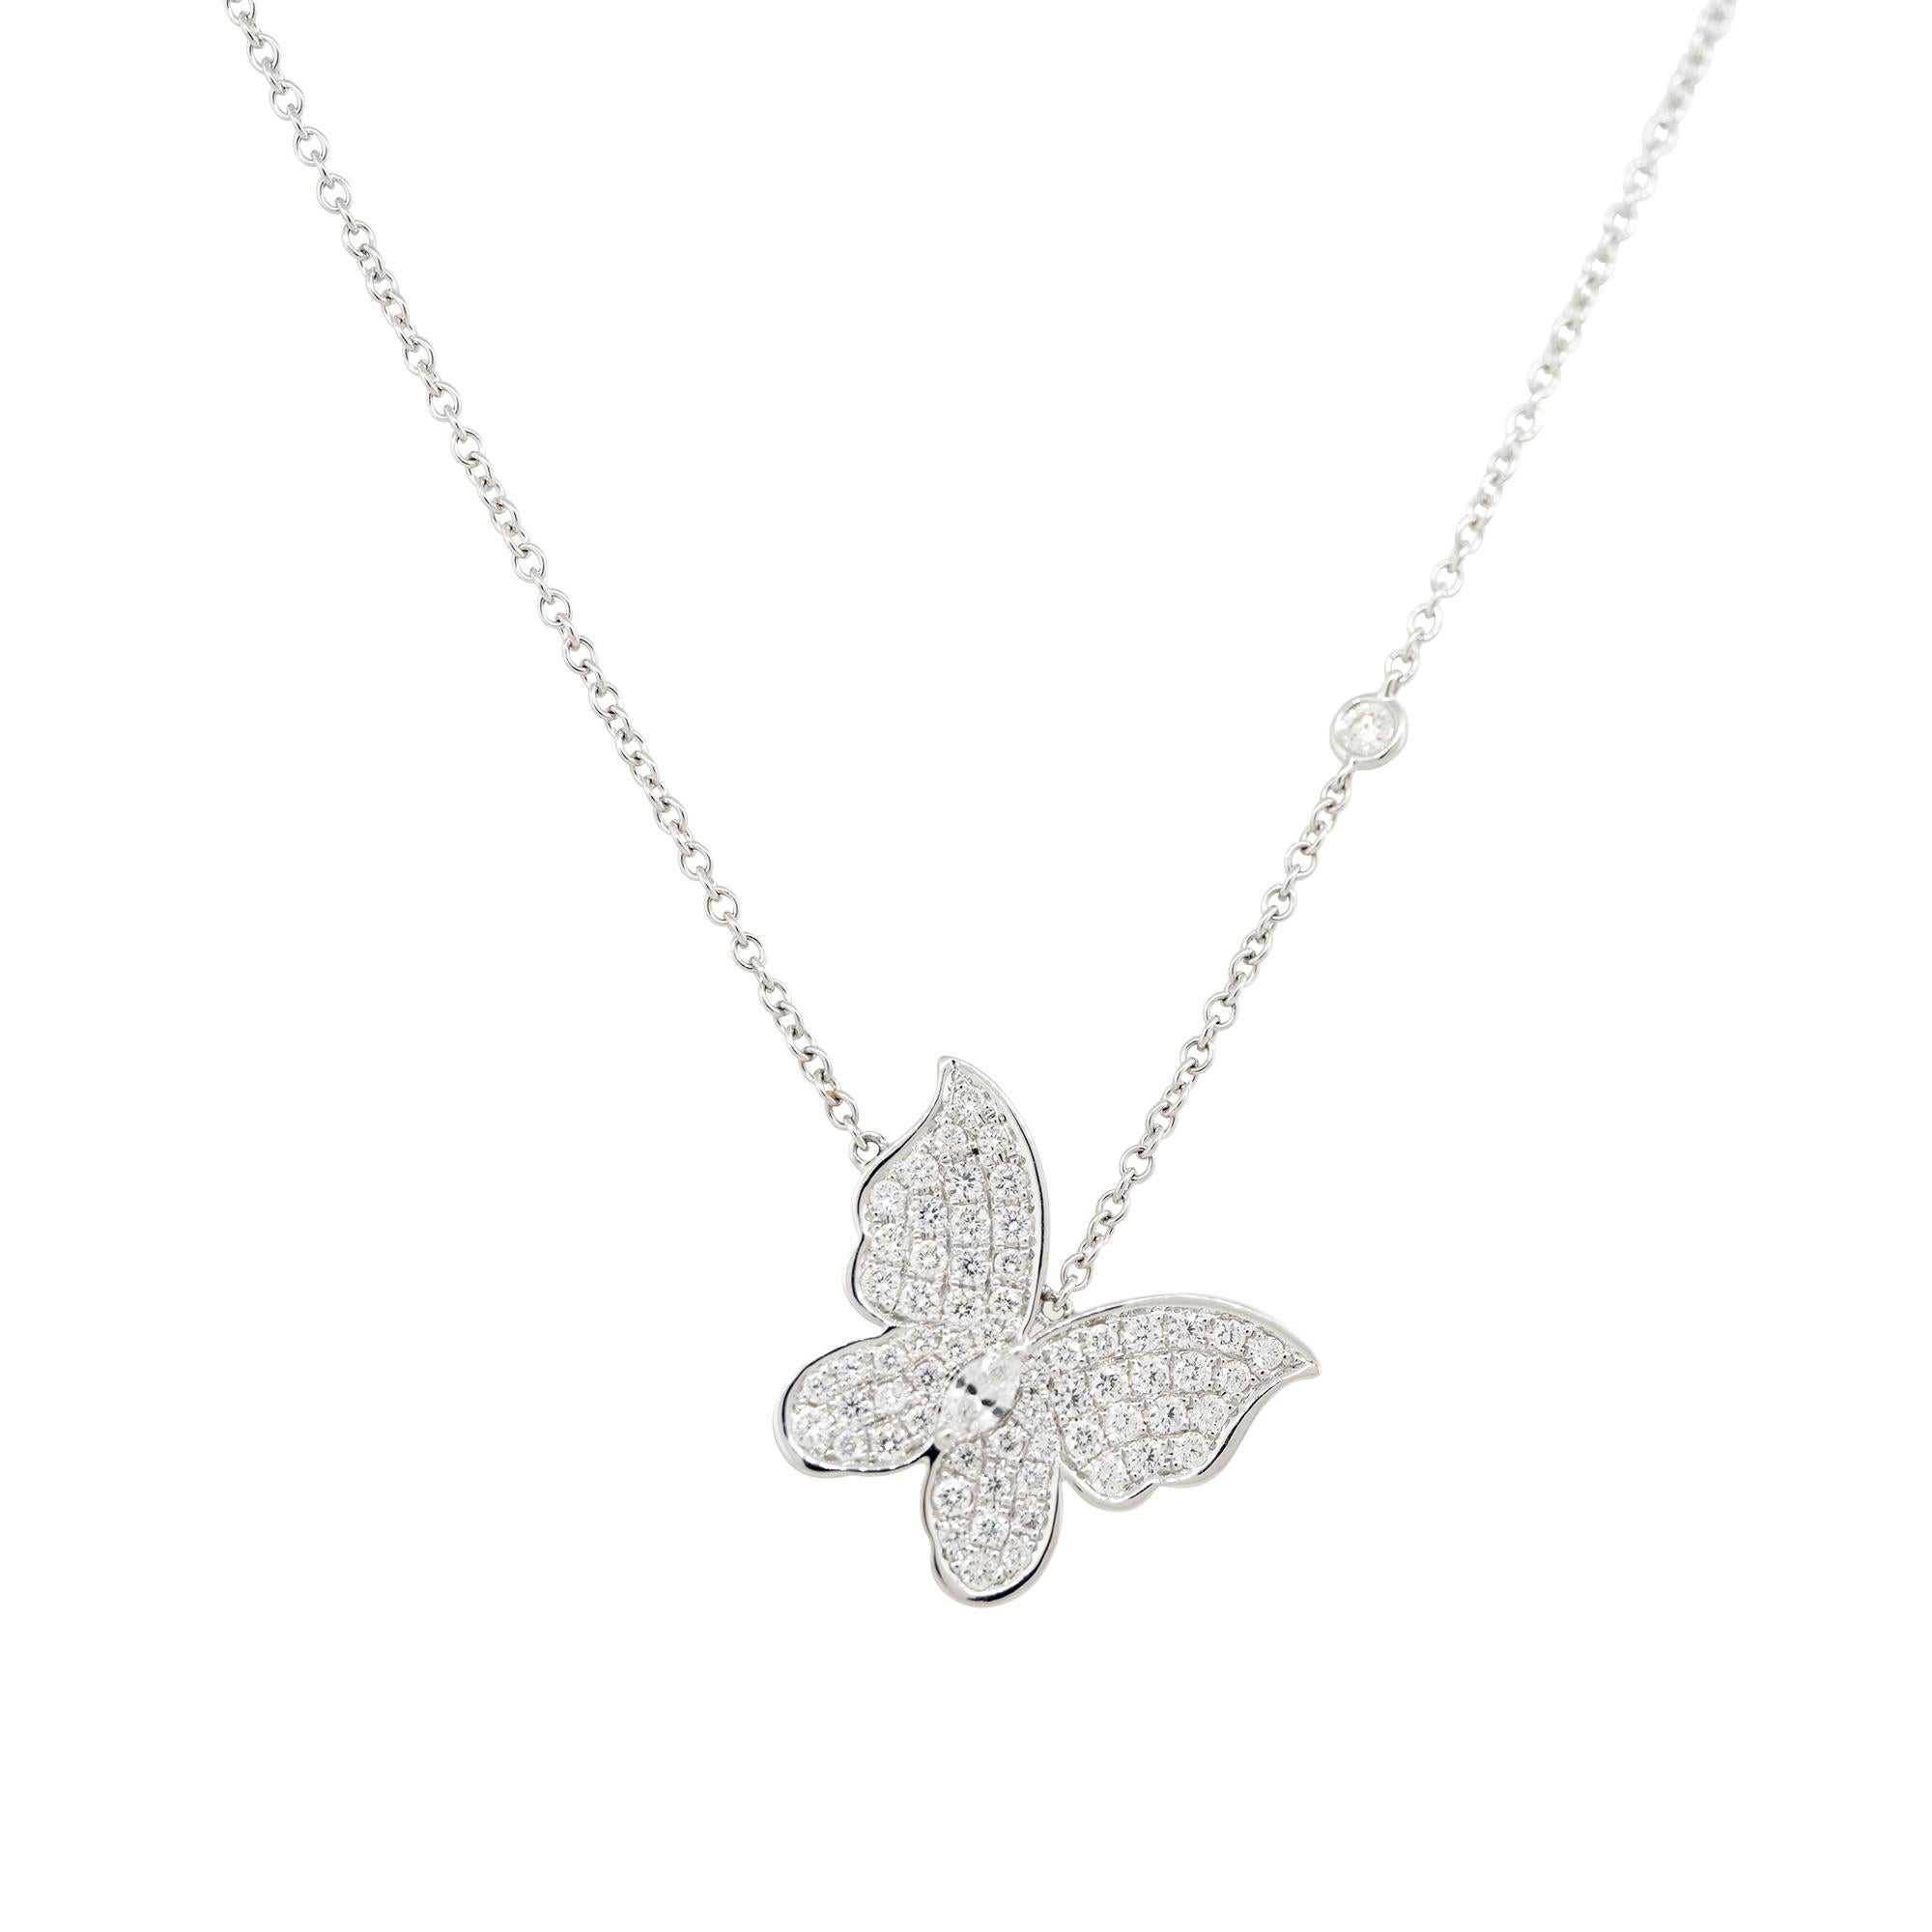 18k White Gold 0.92ctw Pave Diamond Butterfly Necklace
Material: 18k White Gold
Diamond Details: Approximately 0.92ctw of Round Brilliant cut Diamonds. There is also a marquise cut diamond in the center of the butterfly. All diamonds are